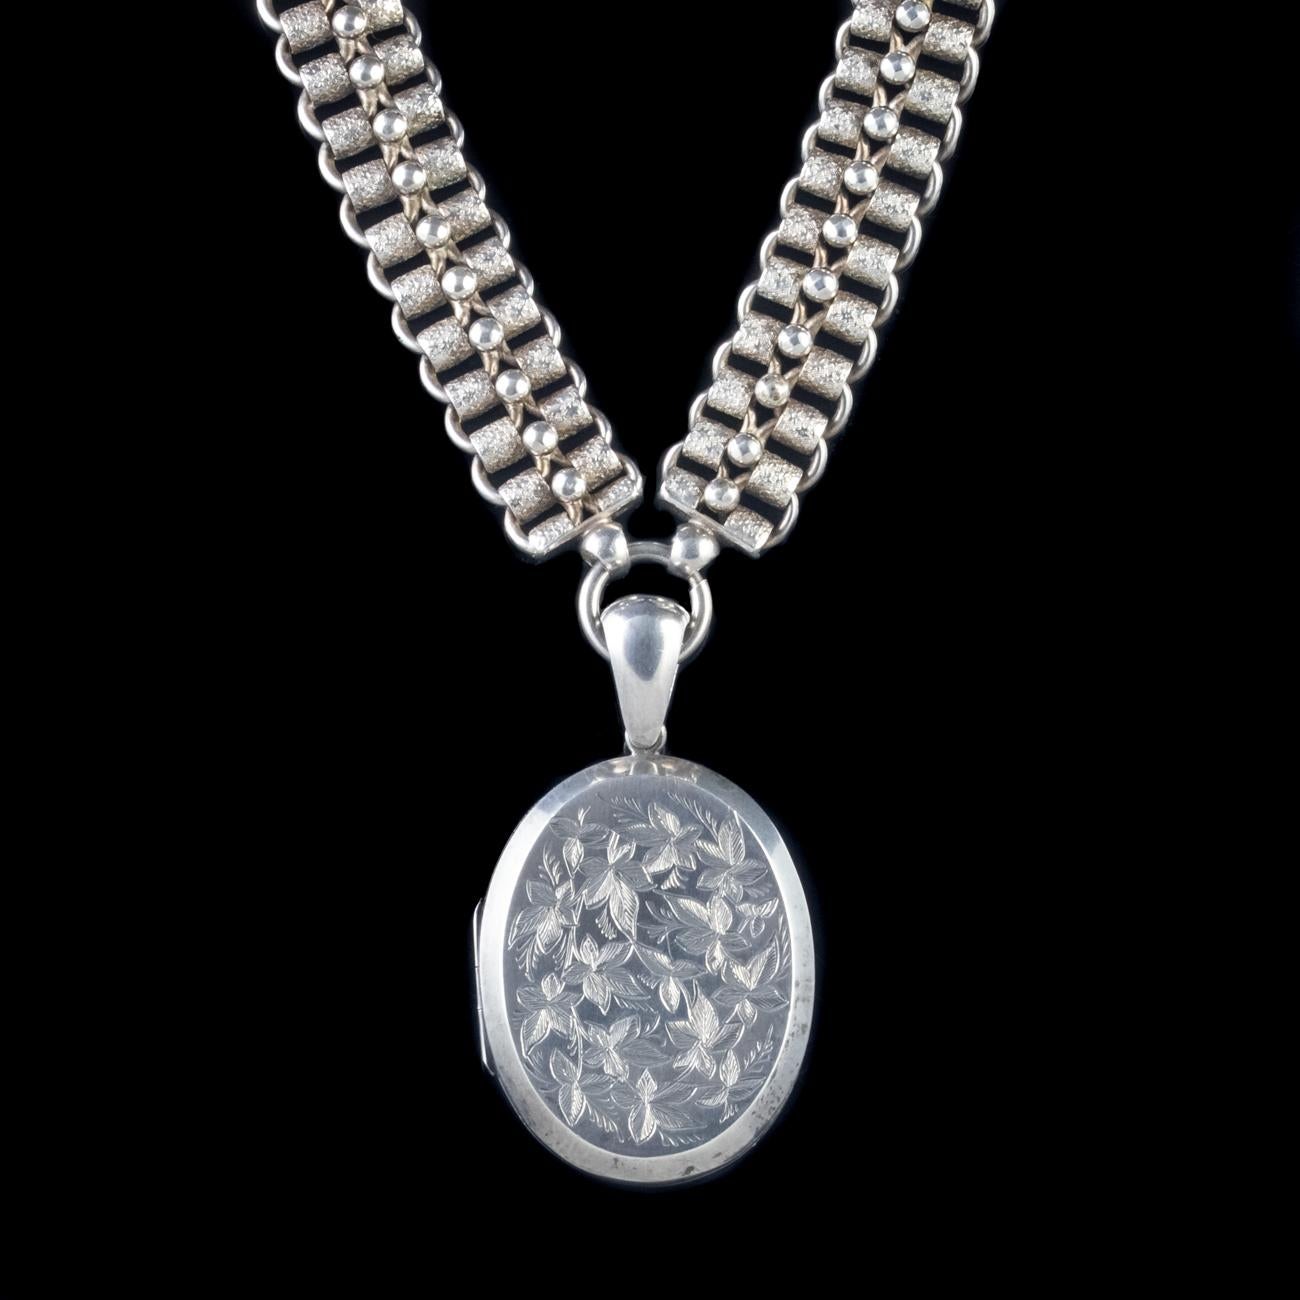 This magnificent Antique Victorian collar and locket has been commissioned in Sterling Silver and is dated 1882. The locket features engravings of ivy on the front and opens up to reveal two windows complete with rims that can be used to house